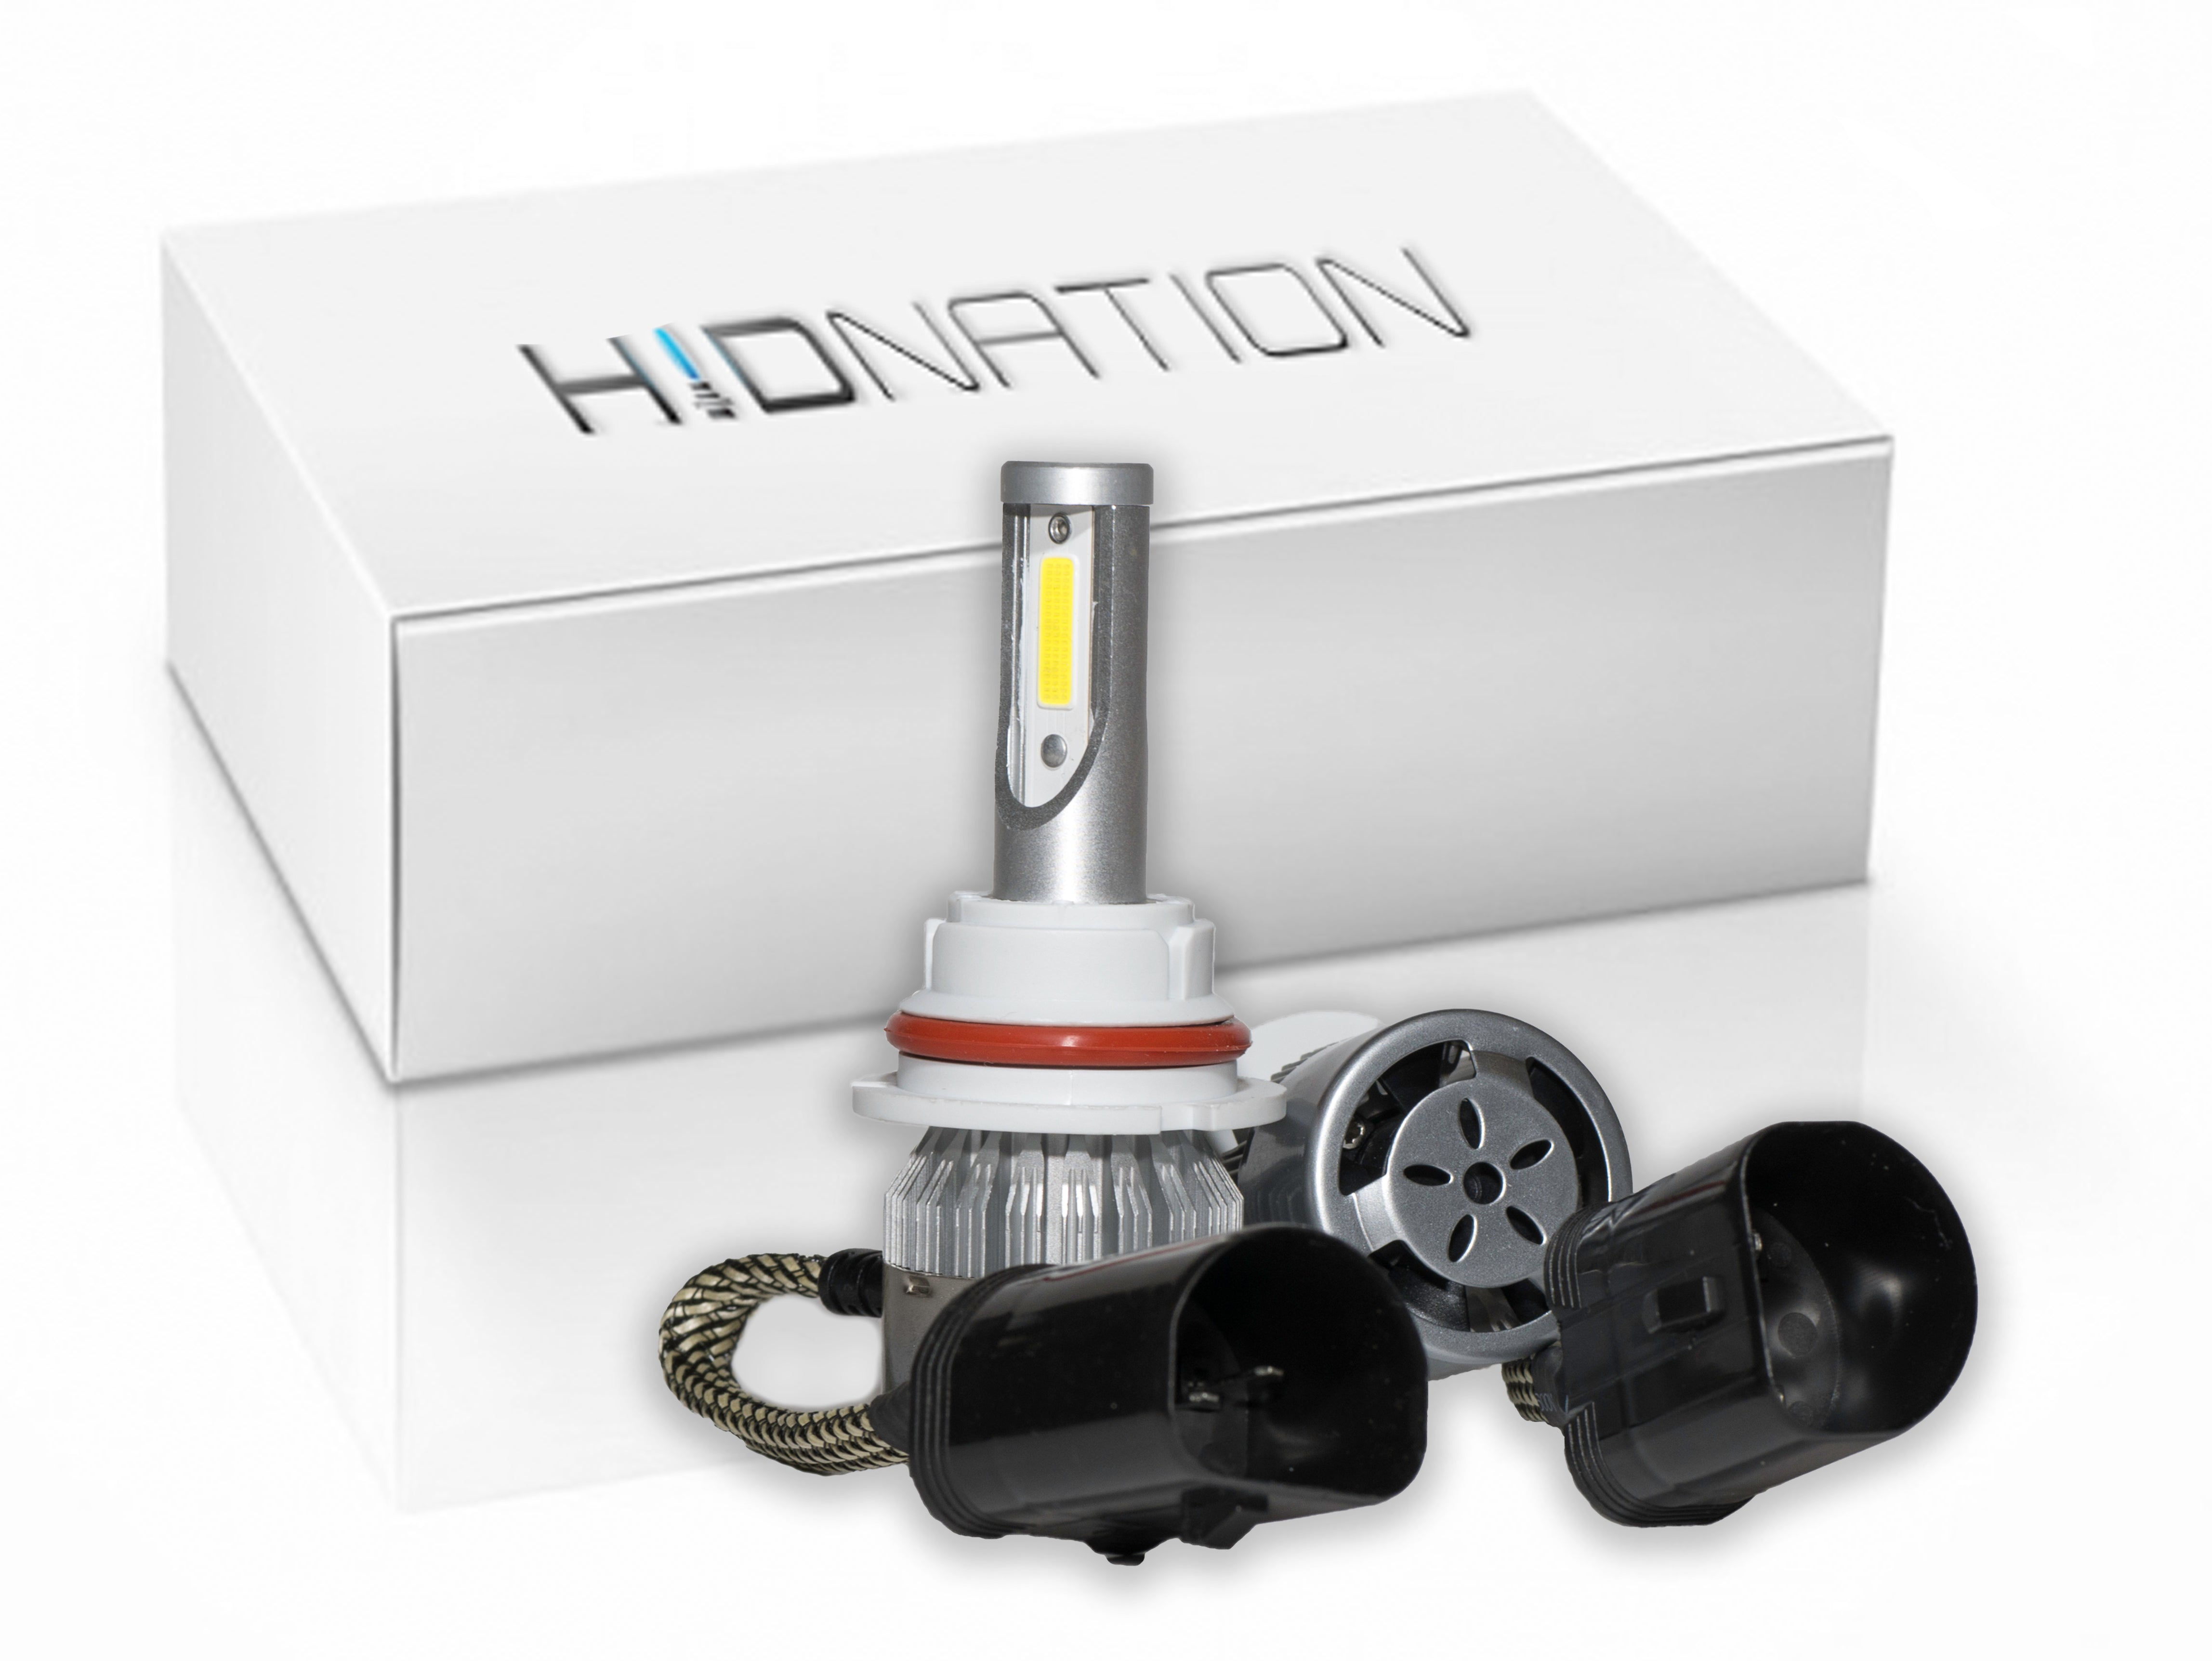 Shop for the Brightest H13 9008 LED Bulb 9 times 200W Car Light Replacement  Headlamp Upgrade